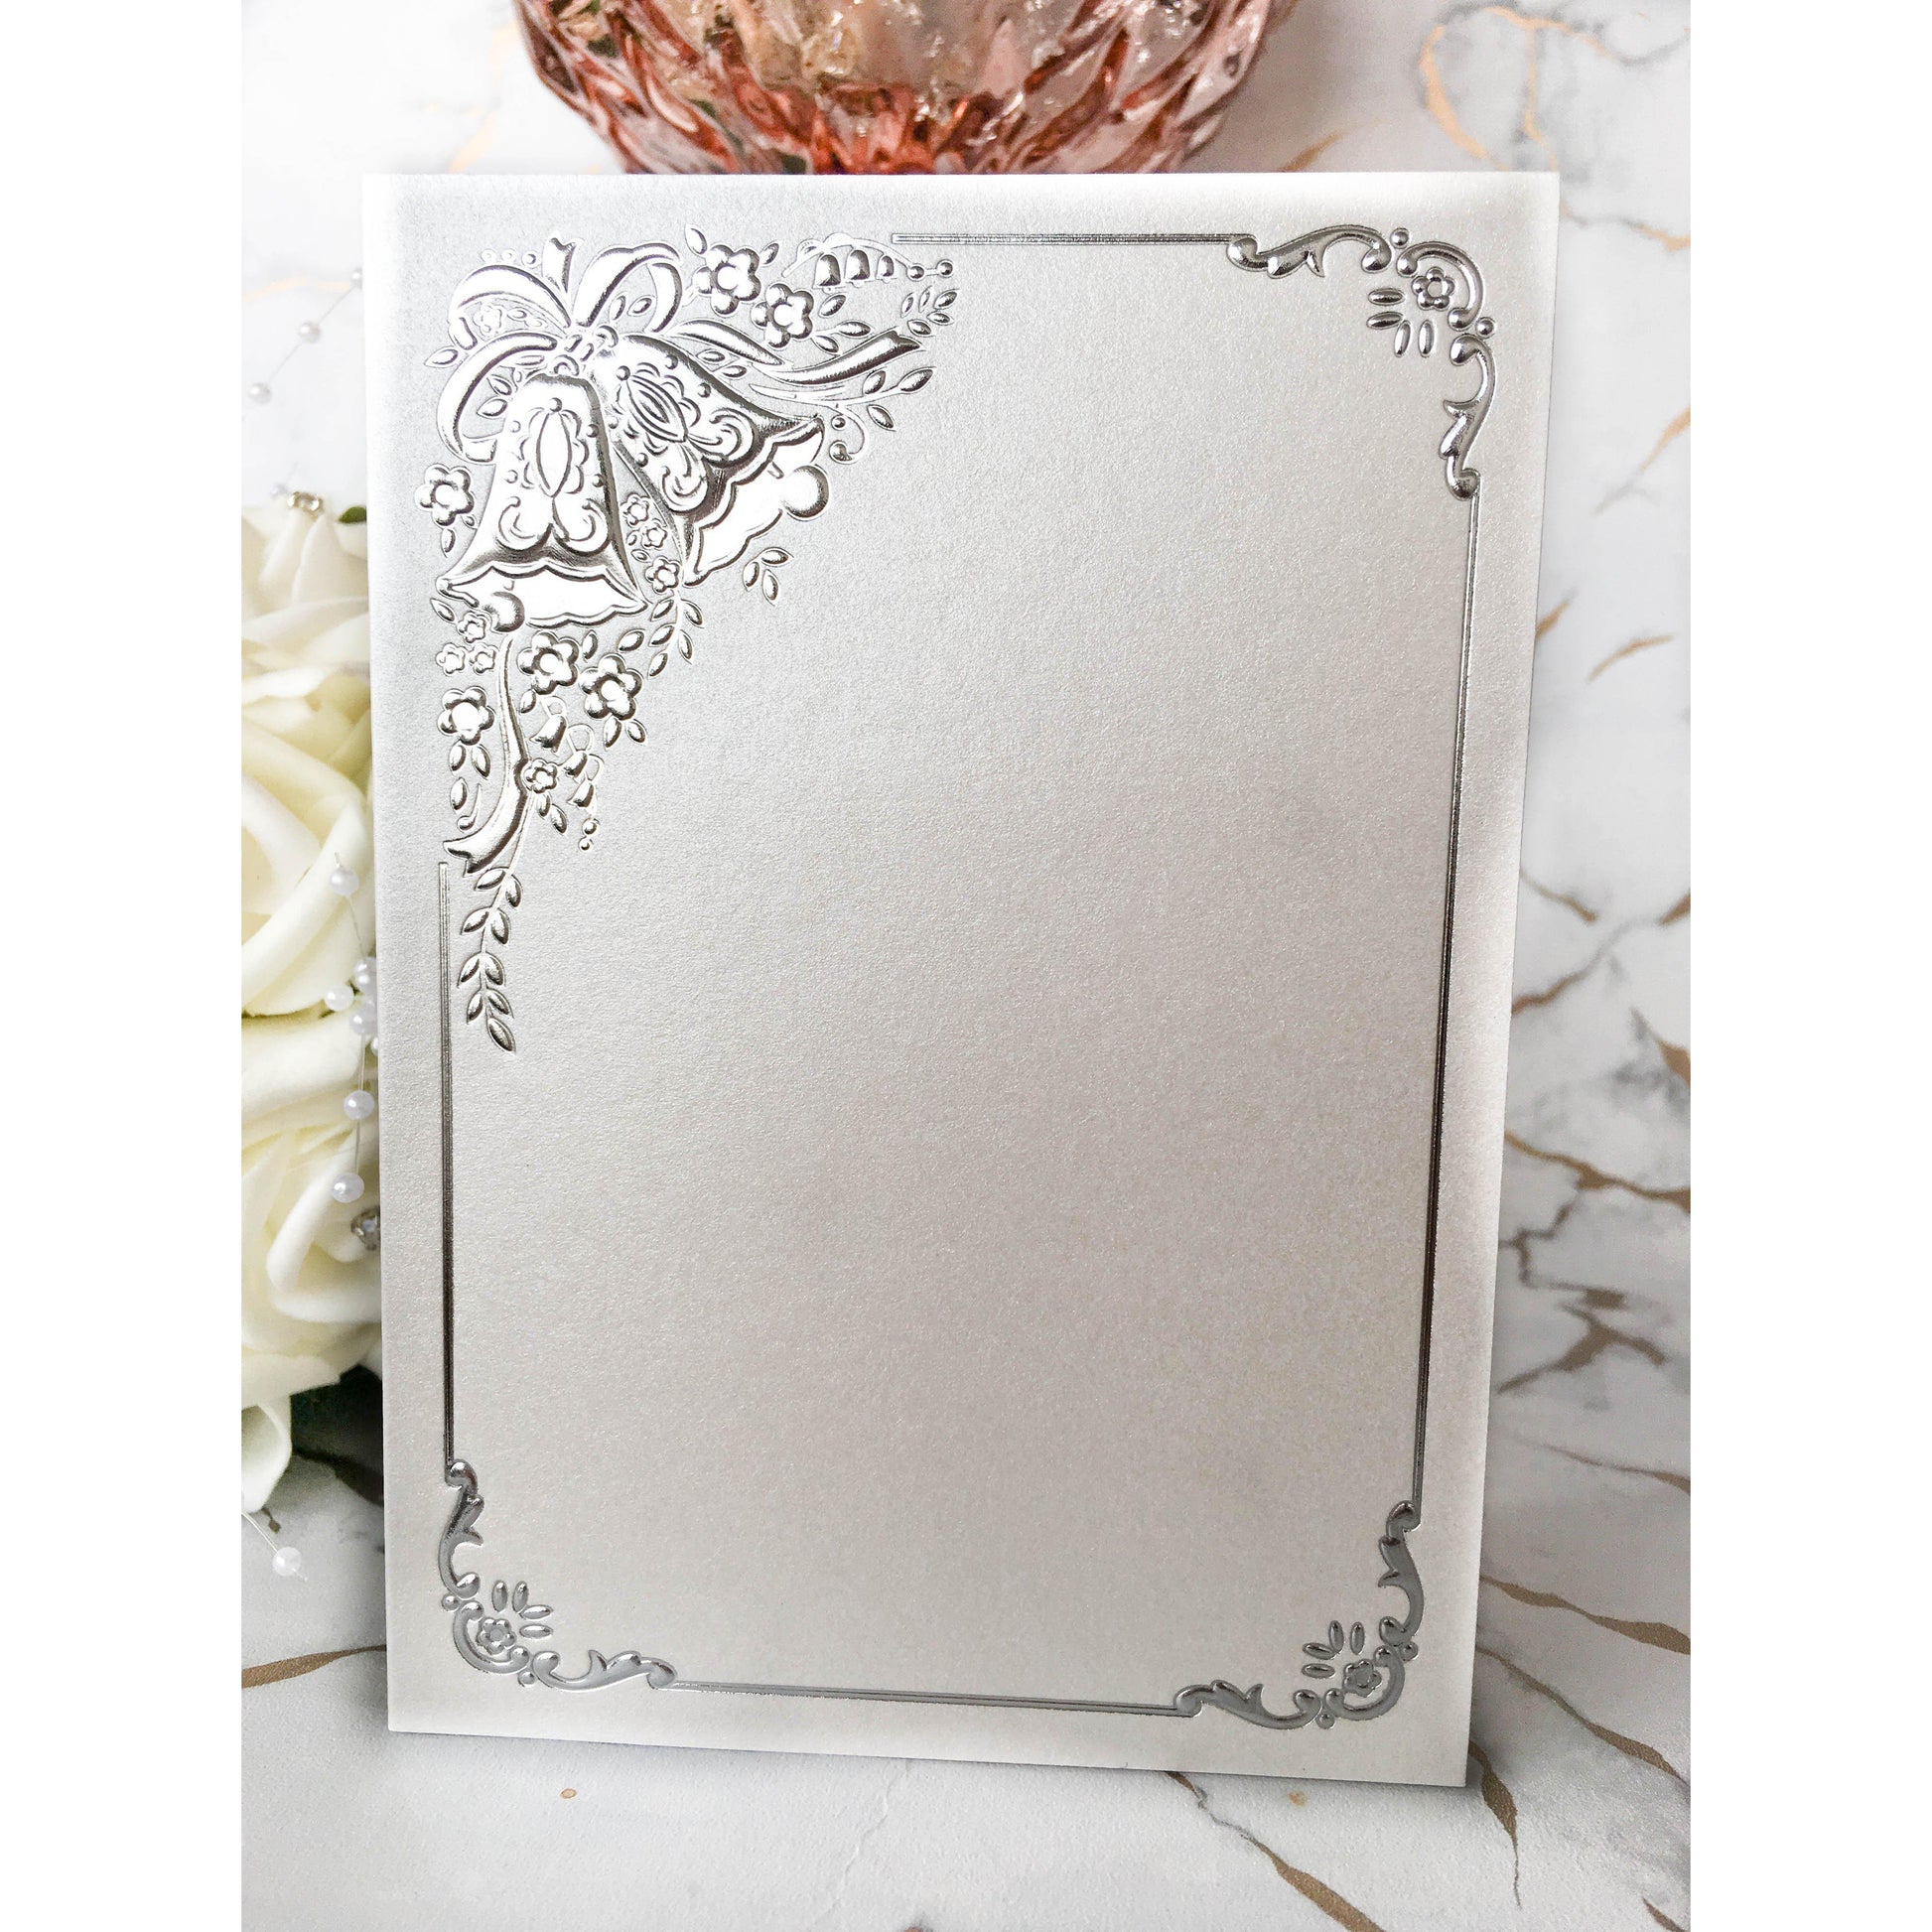 A6 Card Blanks White Pearl With Silver Wedding Bells 10pk With Envelopes - Clearance-The Creative Bride